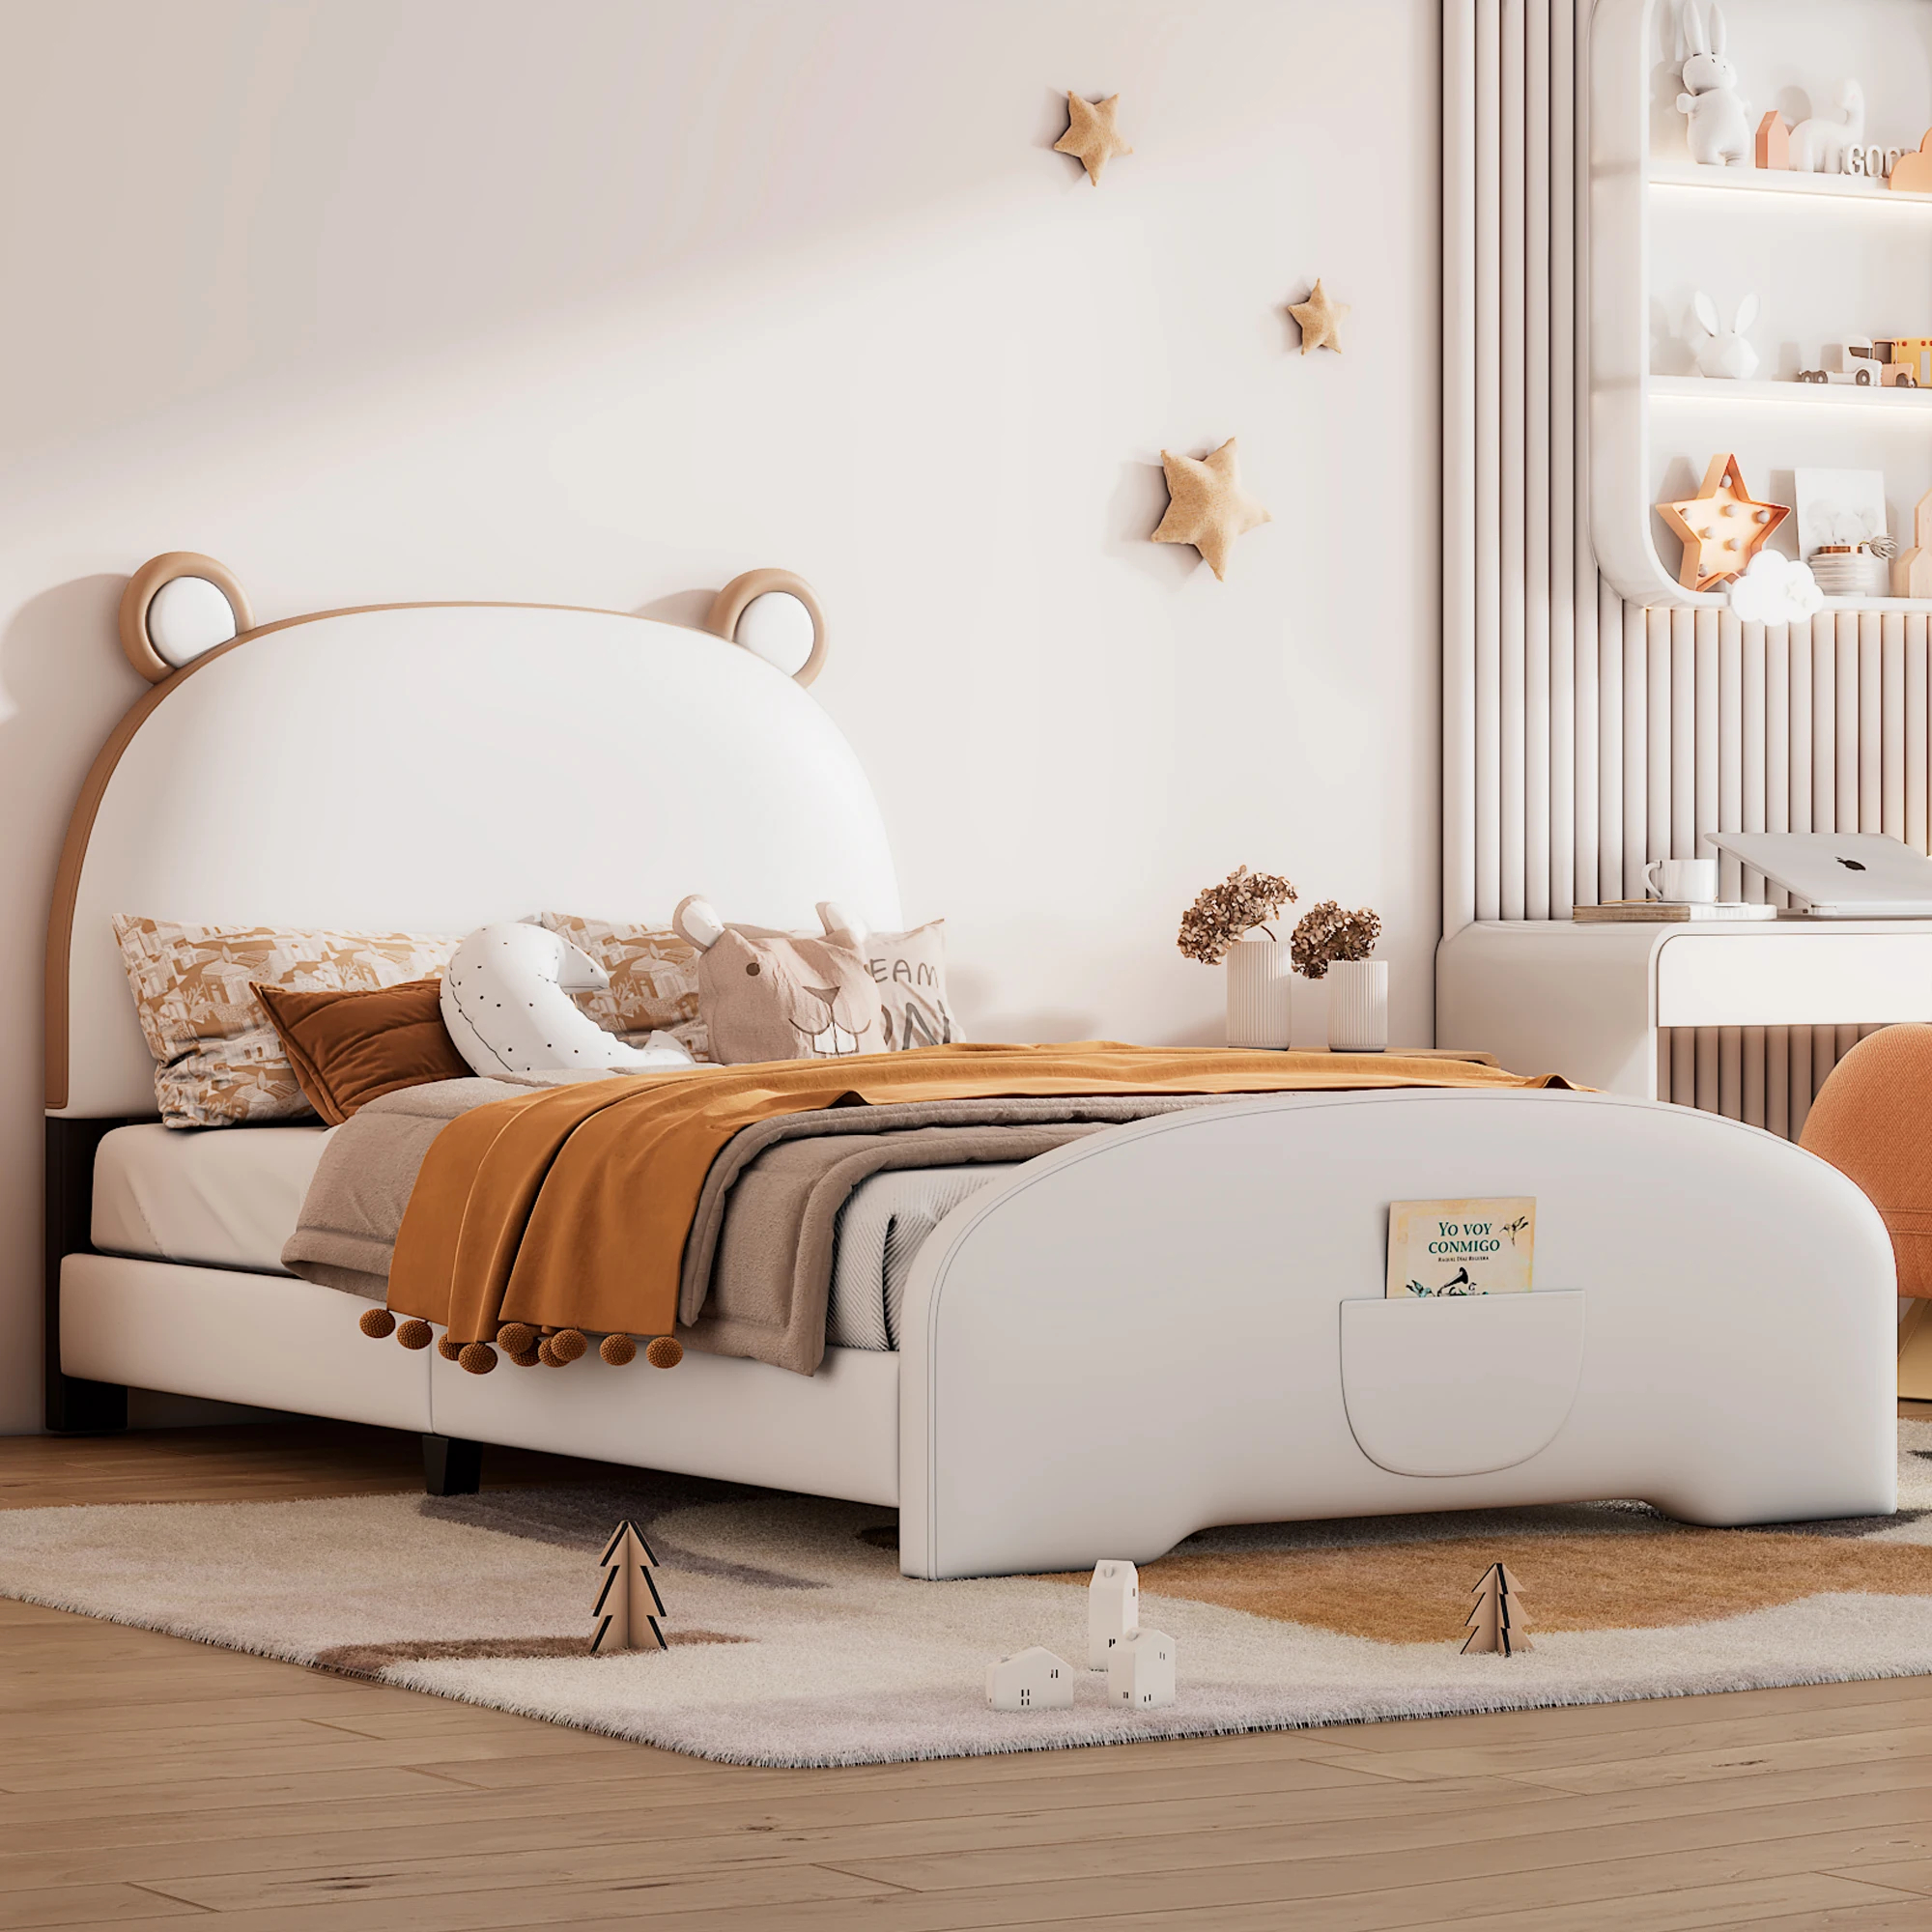 Affordable California King Bed Options for Budget-Conscious Shoppers插图